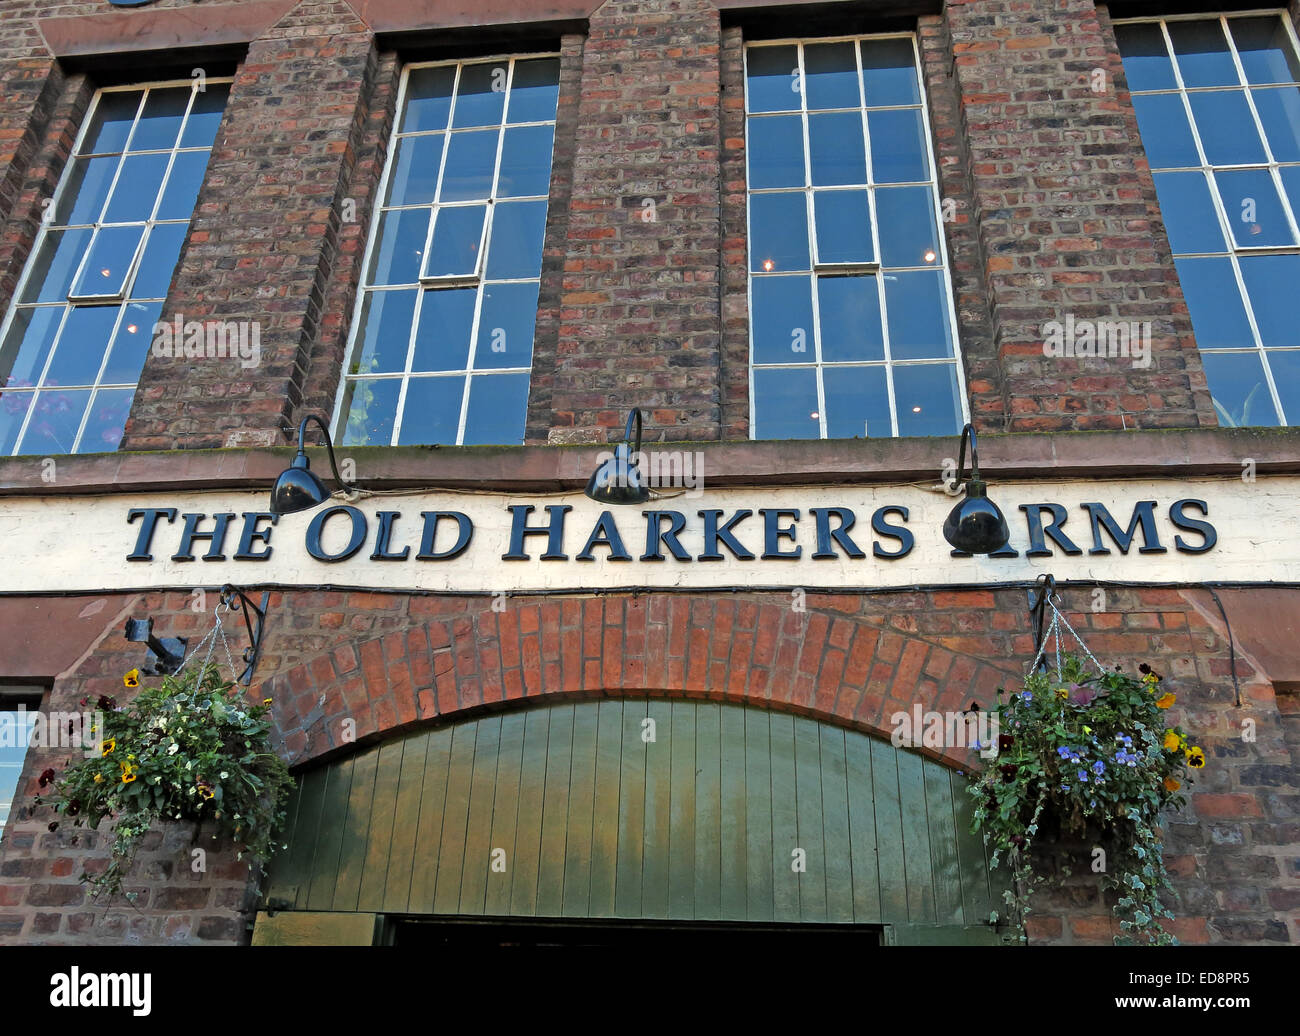 The Old Harkers Arms Canalside, Chester City, England, UK Stock Photo